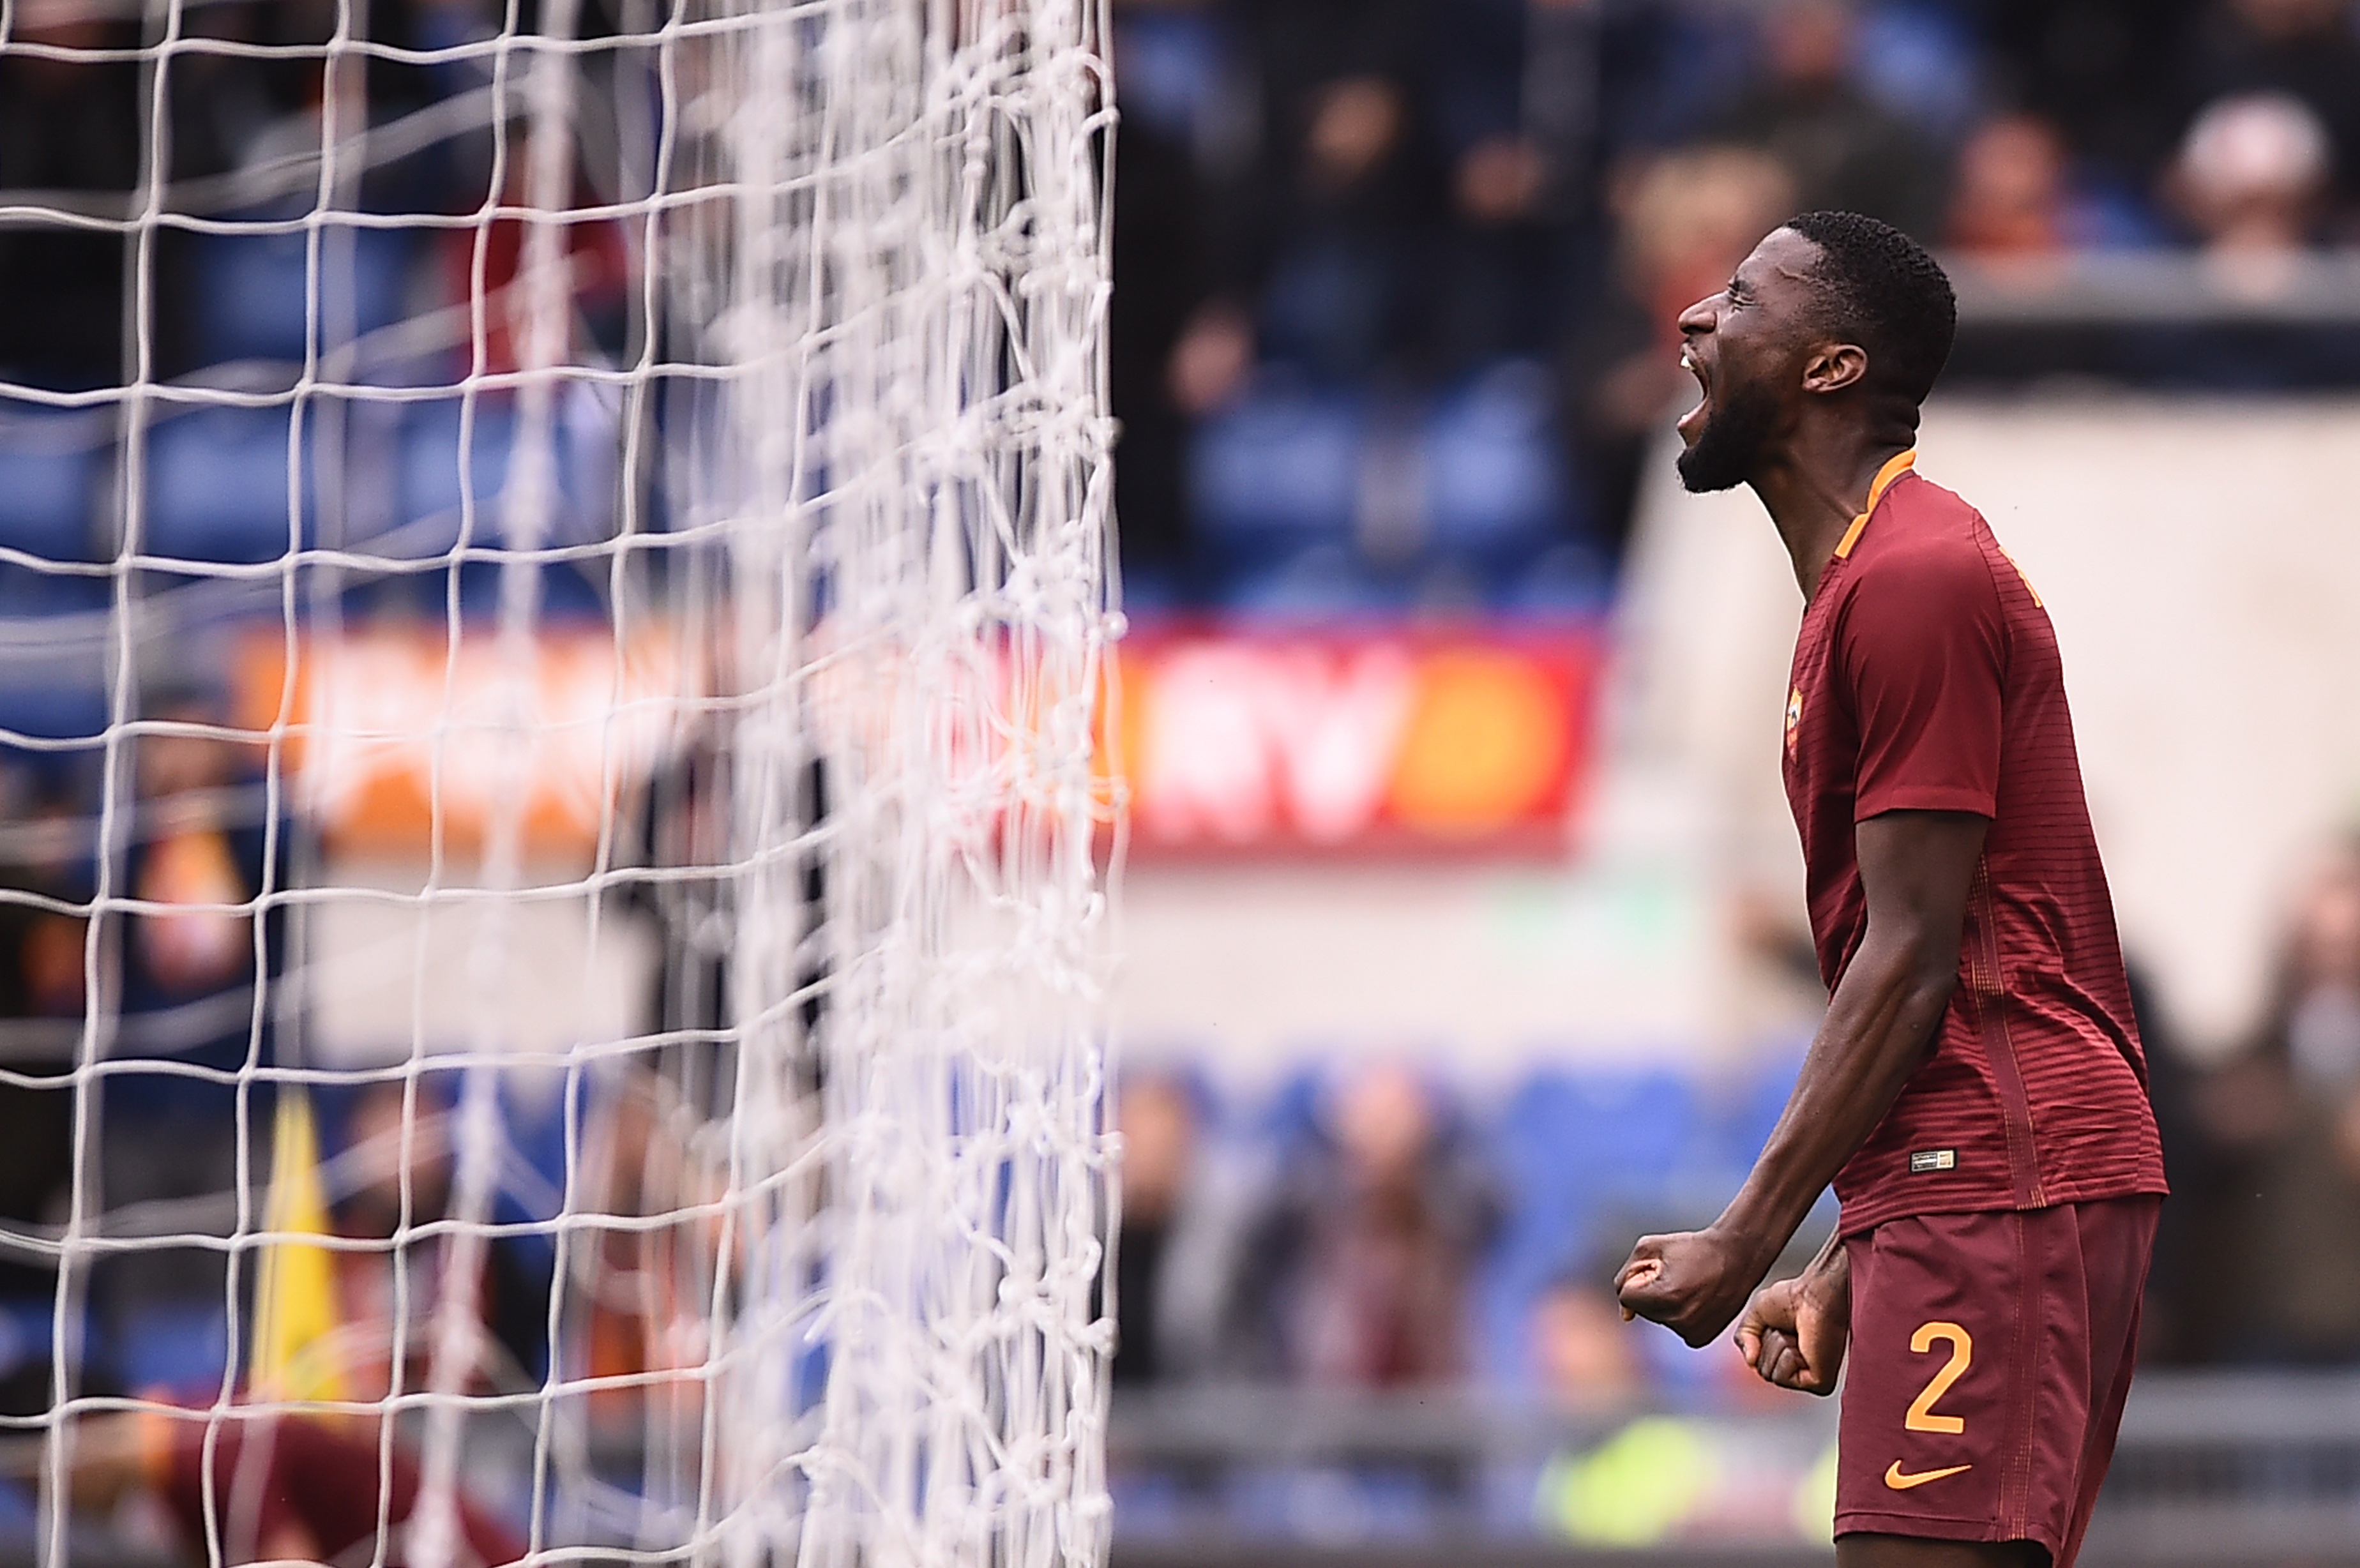 Roma's defender from Germany Antonio Rudiger reacts during the Italian Serie A football match AS Roma vs Napoli on March 4, 2017 at the Olympic Stadium in Rome. Napoli won 1-2. / AFP PHOTO / FILIPPO MONTEFORTE        (Photo credit should read FILIPPO MONTEFORTE/AFP/Getty Images)